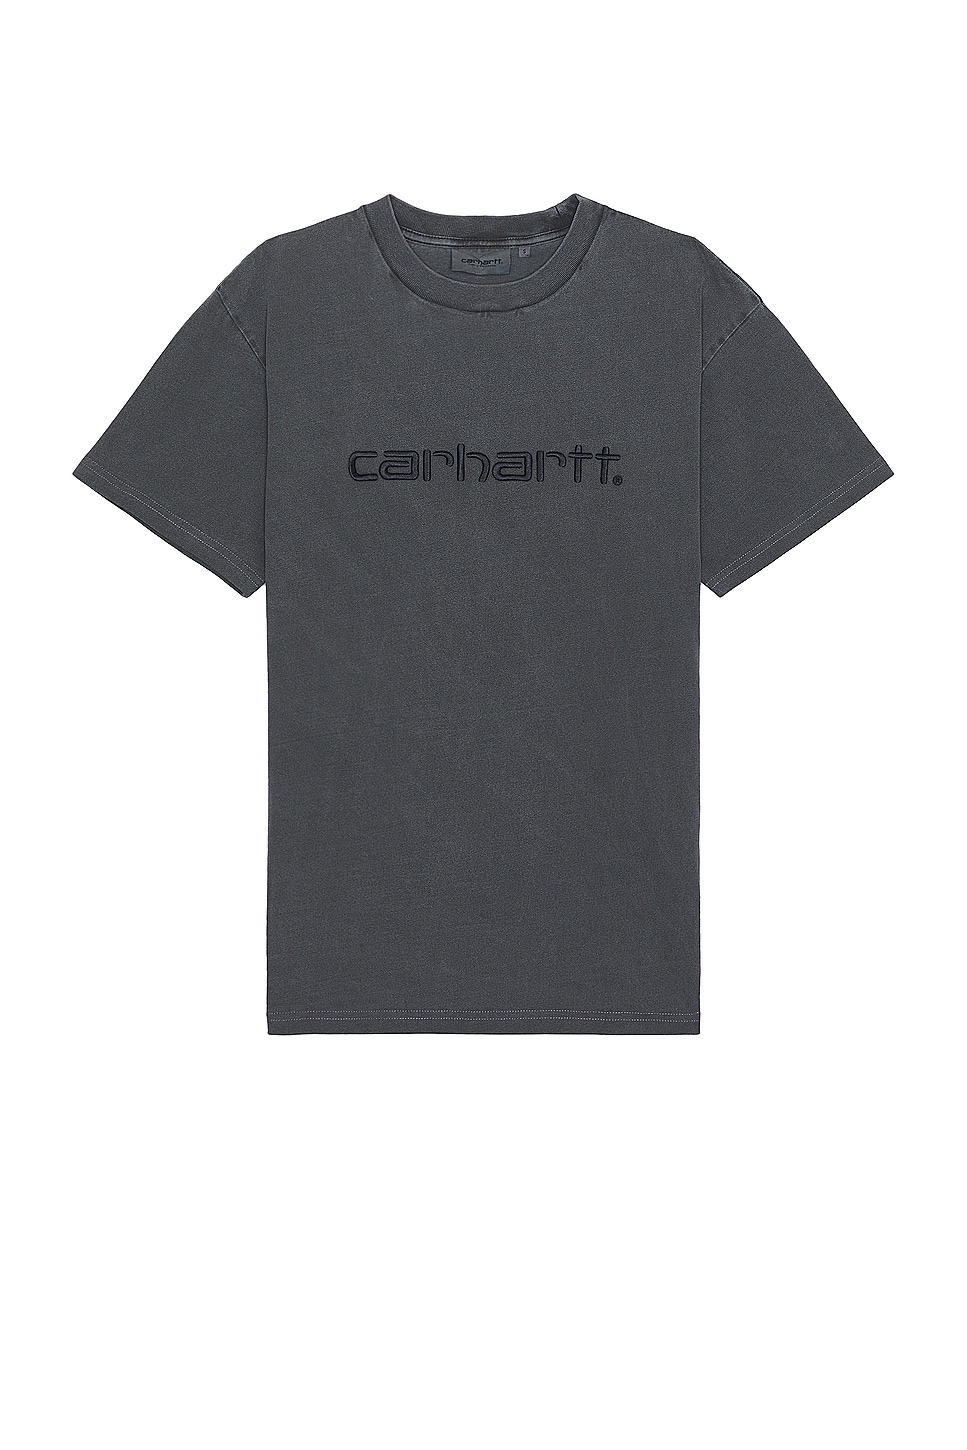 Image 1 of Carhartt WIP Short Sleeve Duster T-shirt in Black Garment Dyed